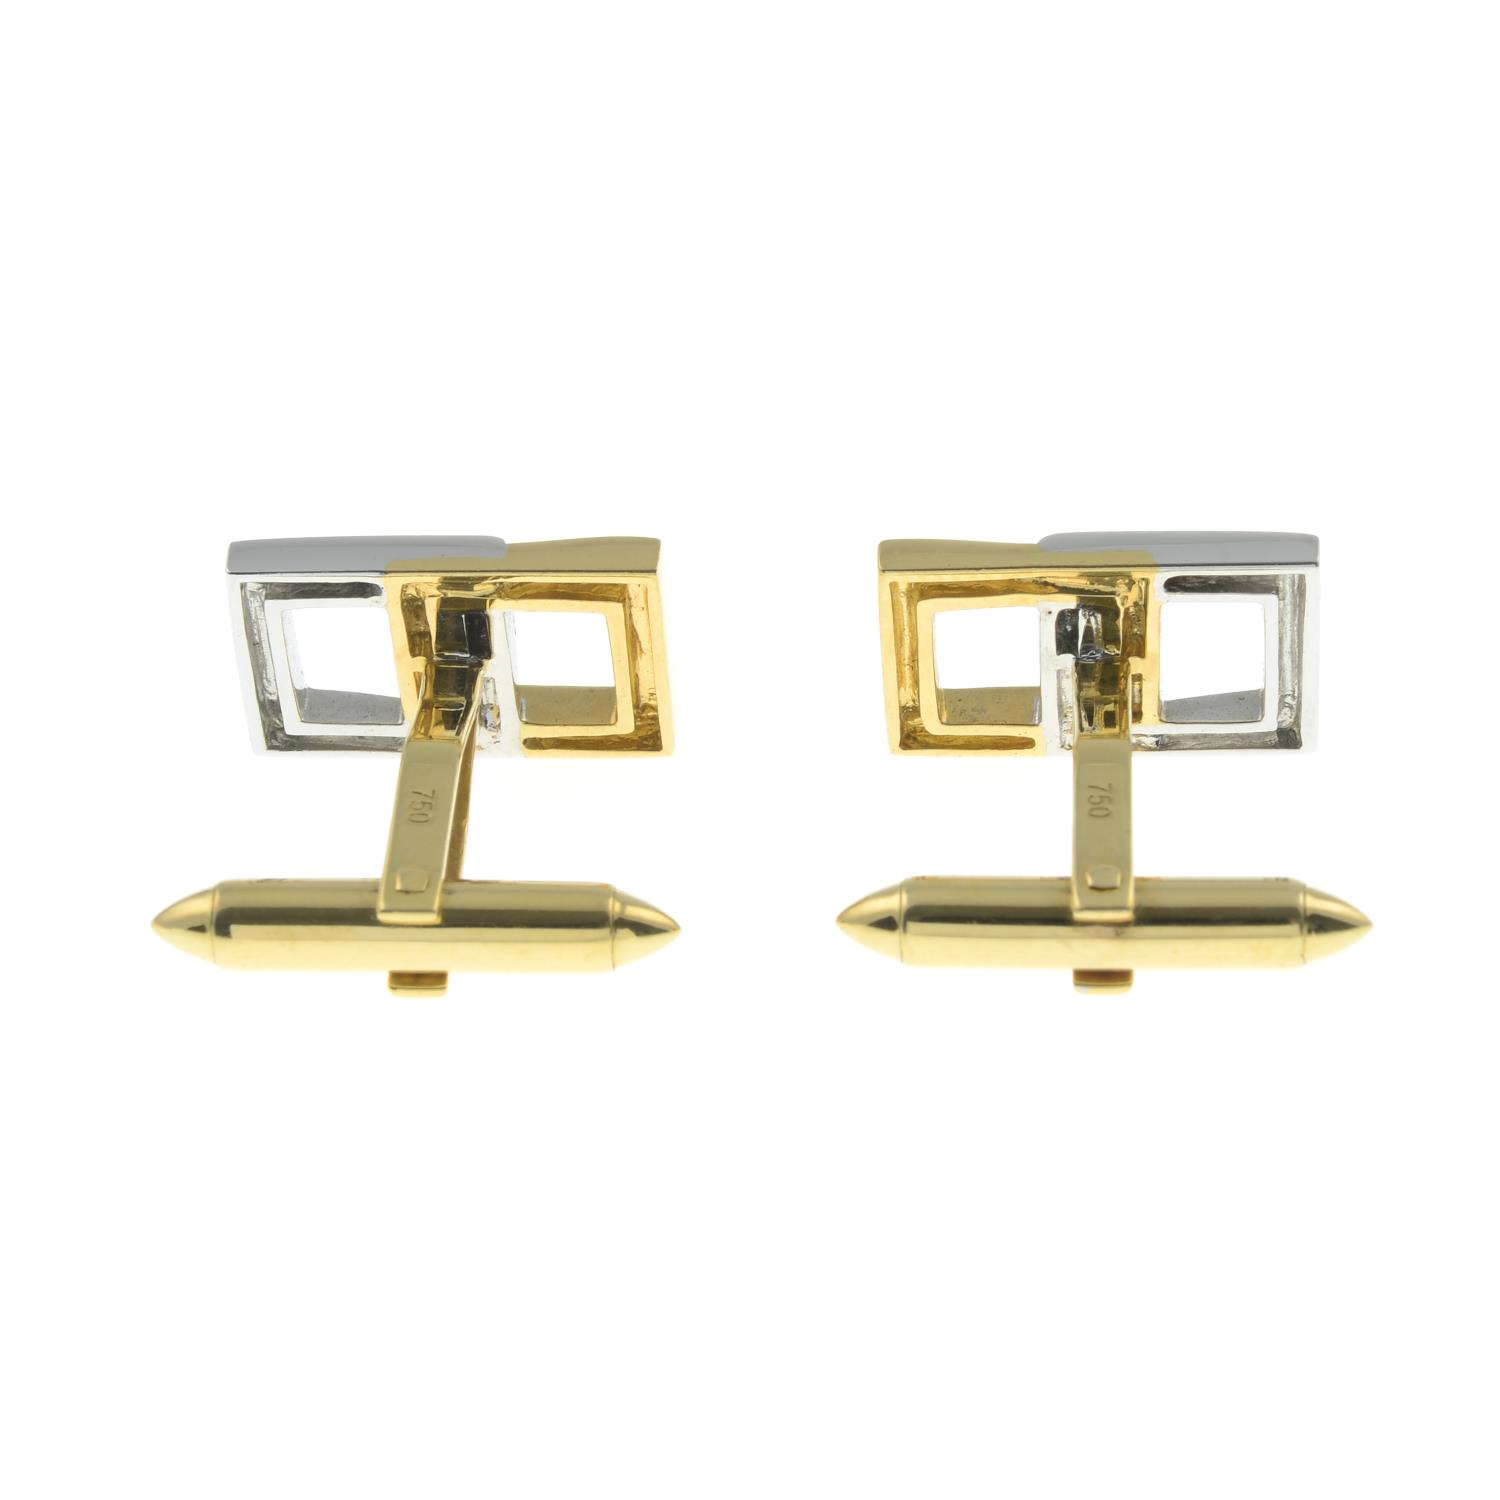 A pair of 18ct gold bi-colour cufflinks, with geometric motif.Hallmarks for 18ct gold. - Image 2 of 2